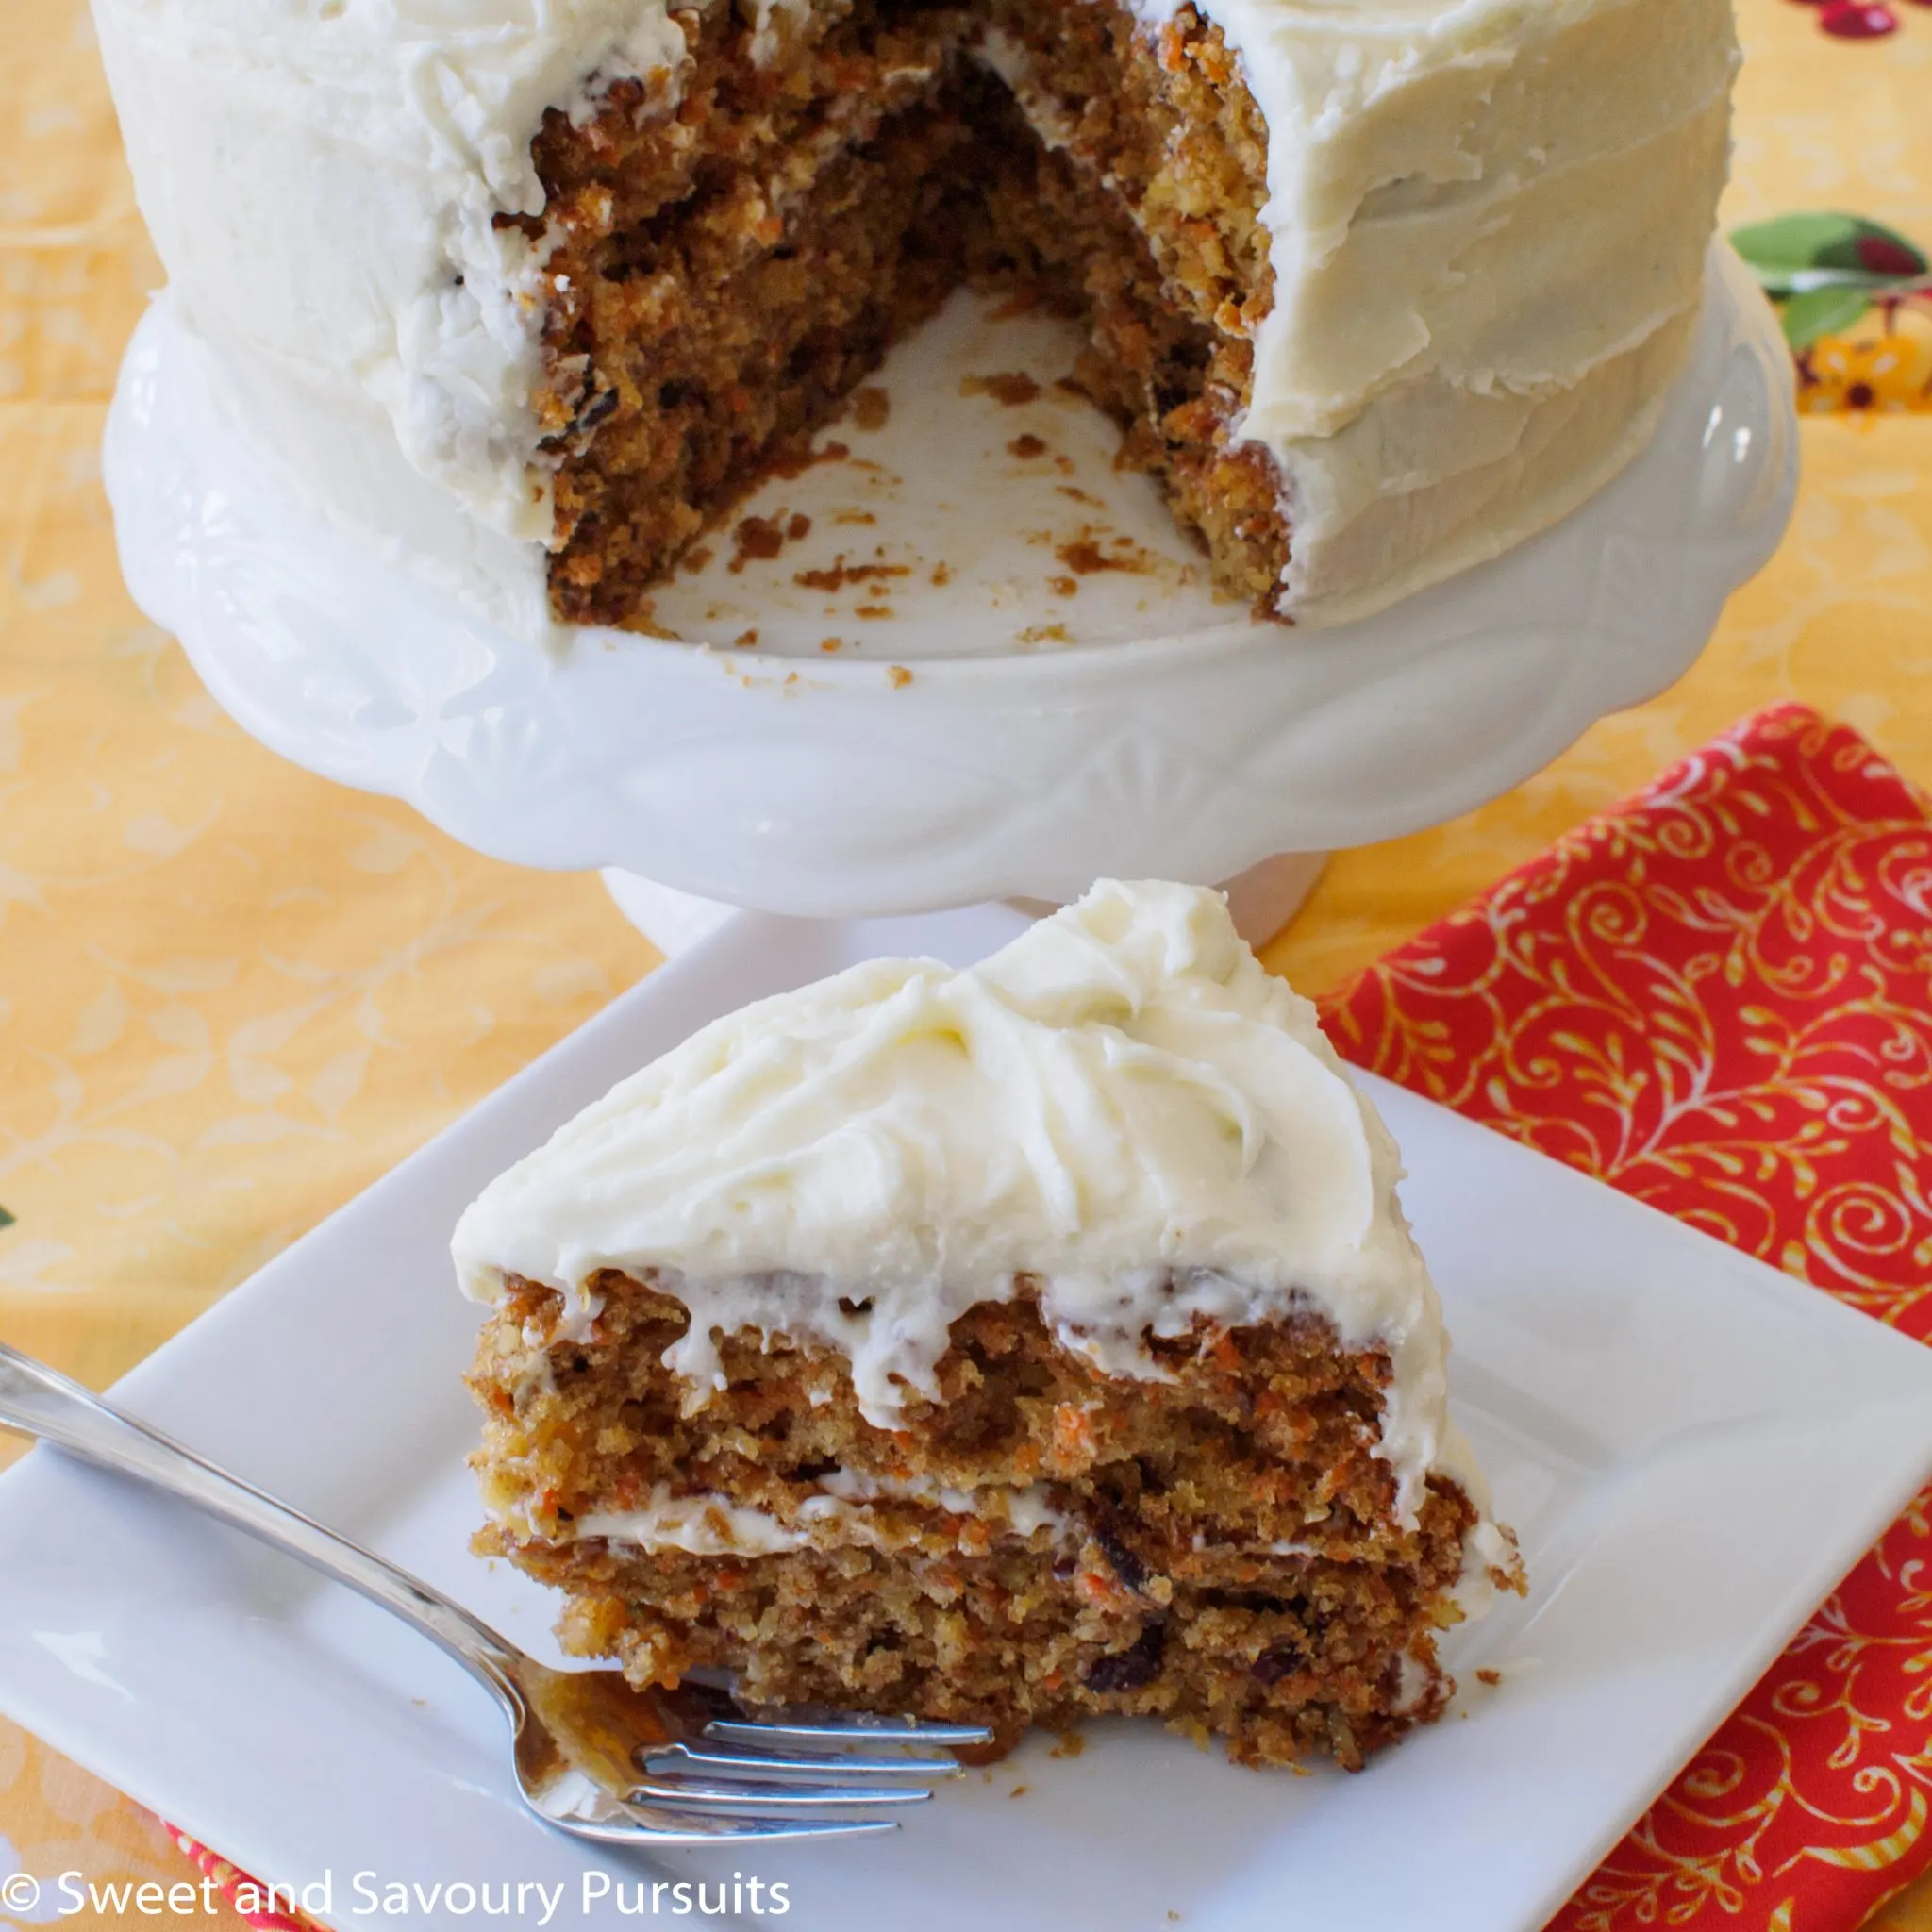 A slice of carrot cake on a dish.